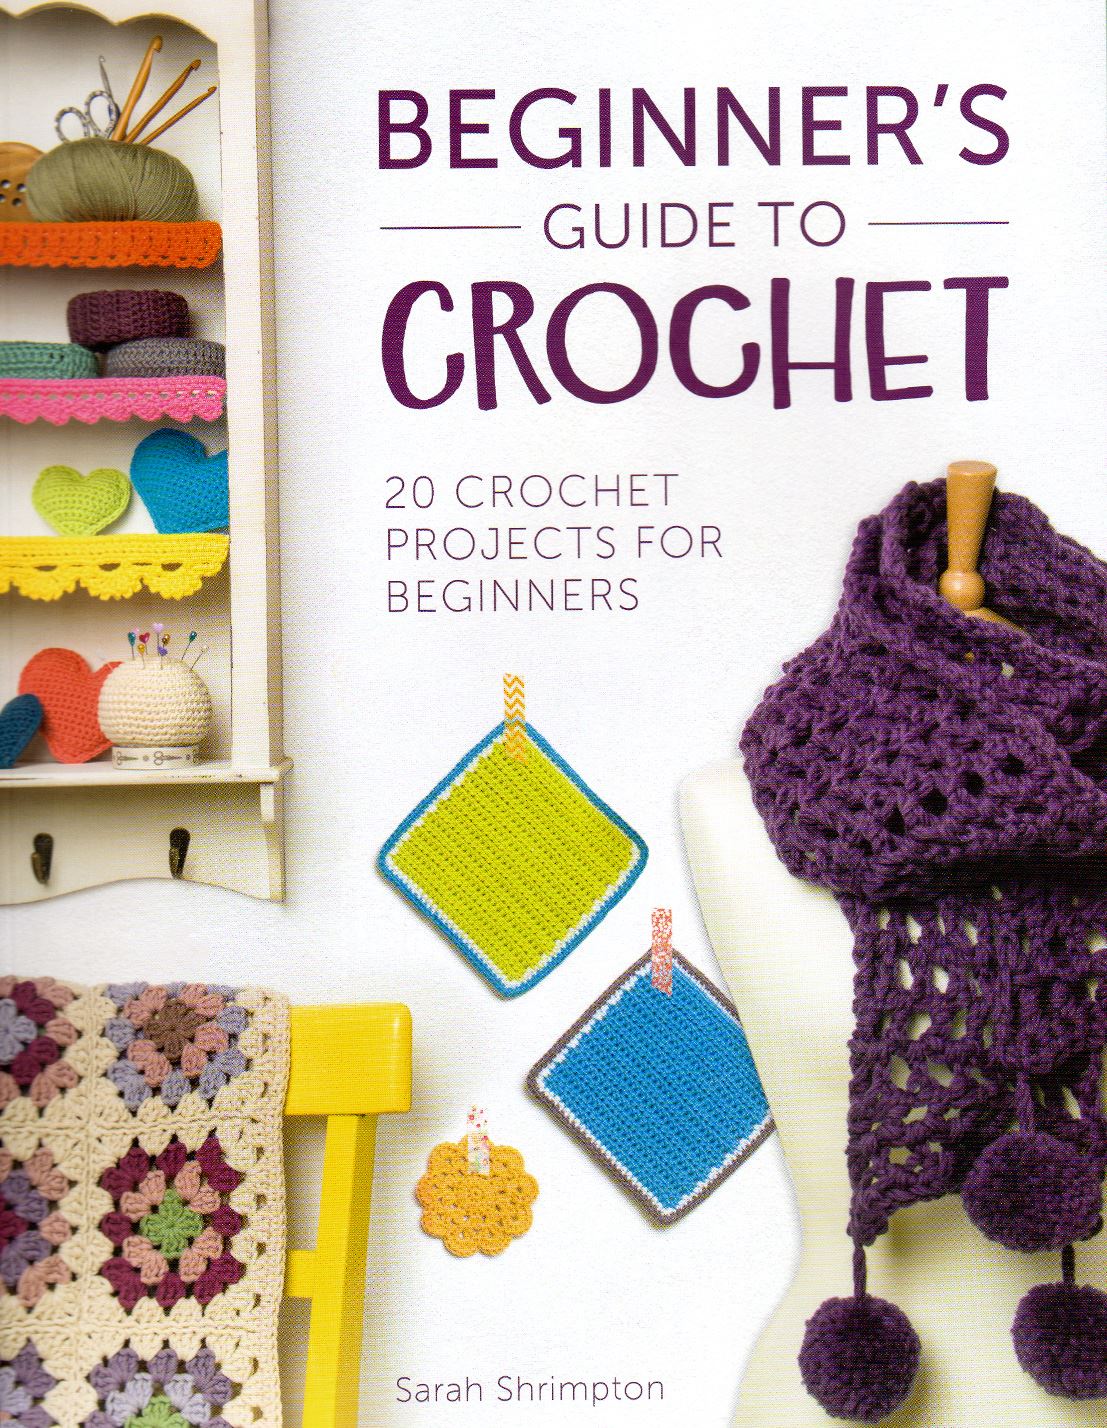  The Crochet Bible: [5 Books In 1] • Master The Art of